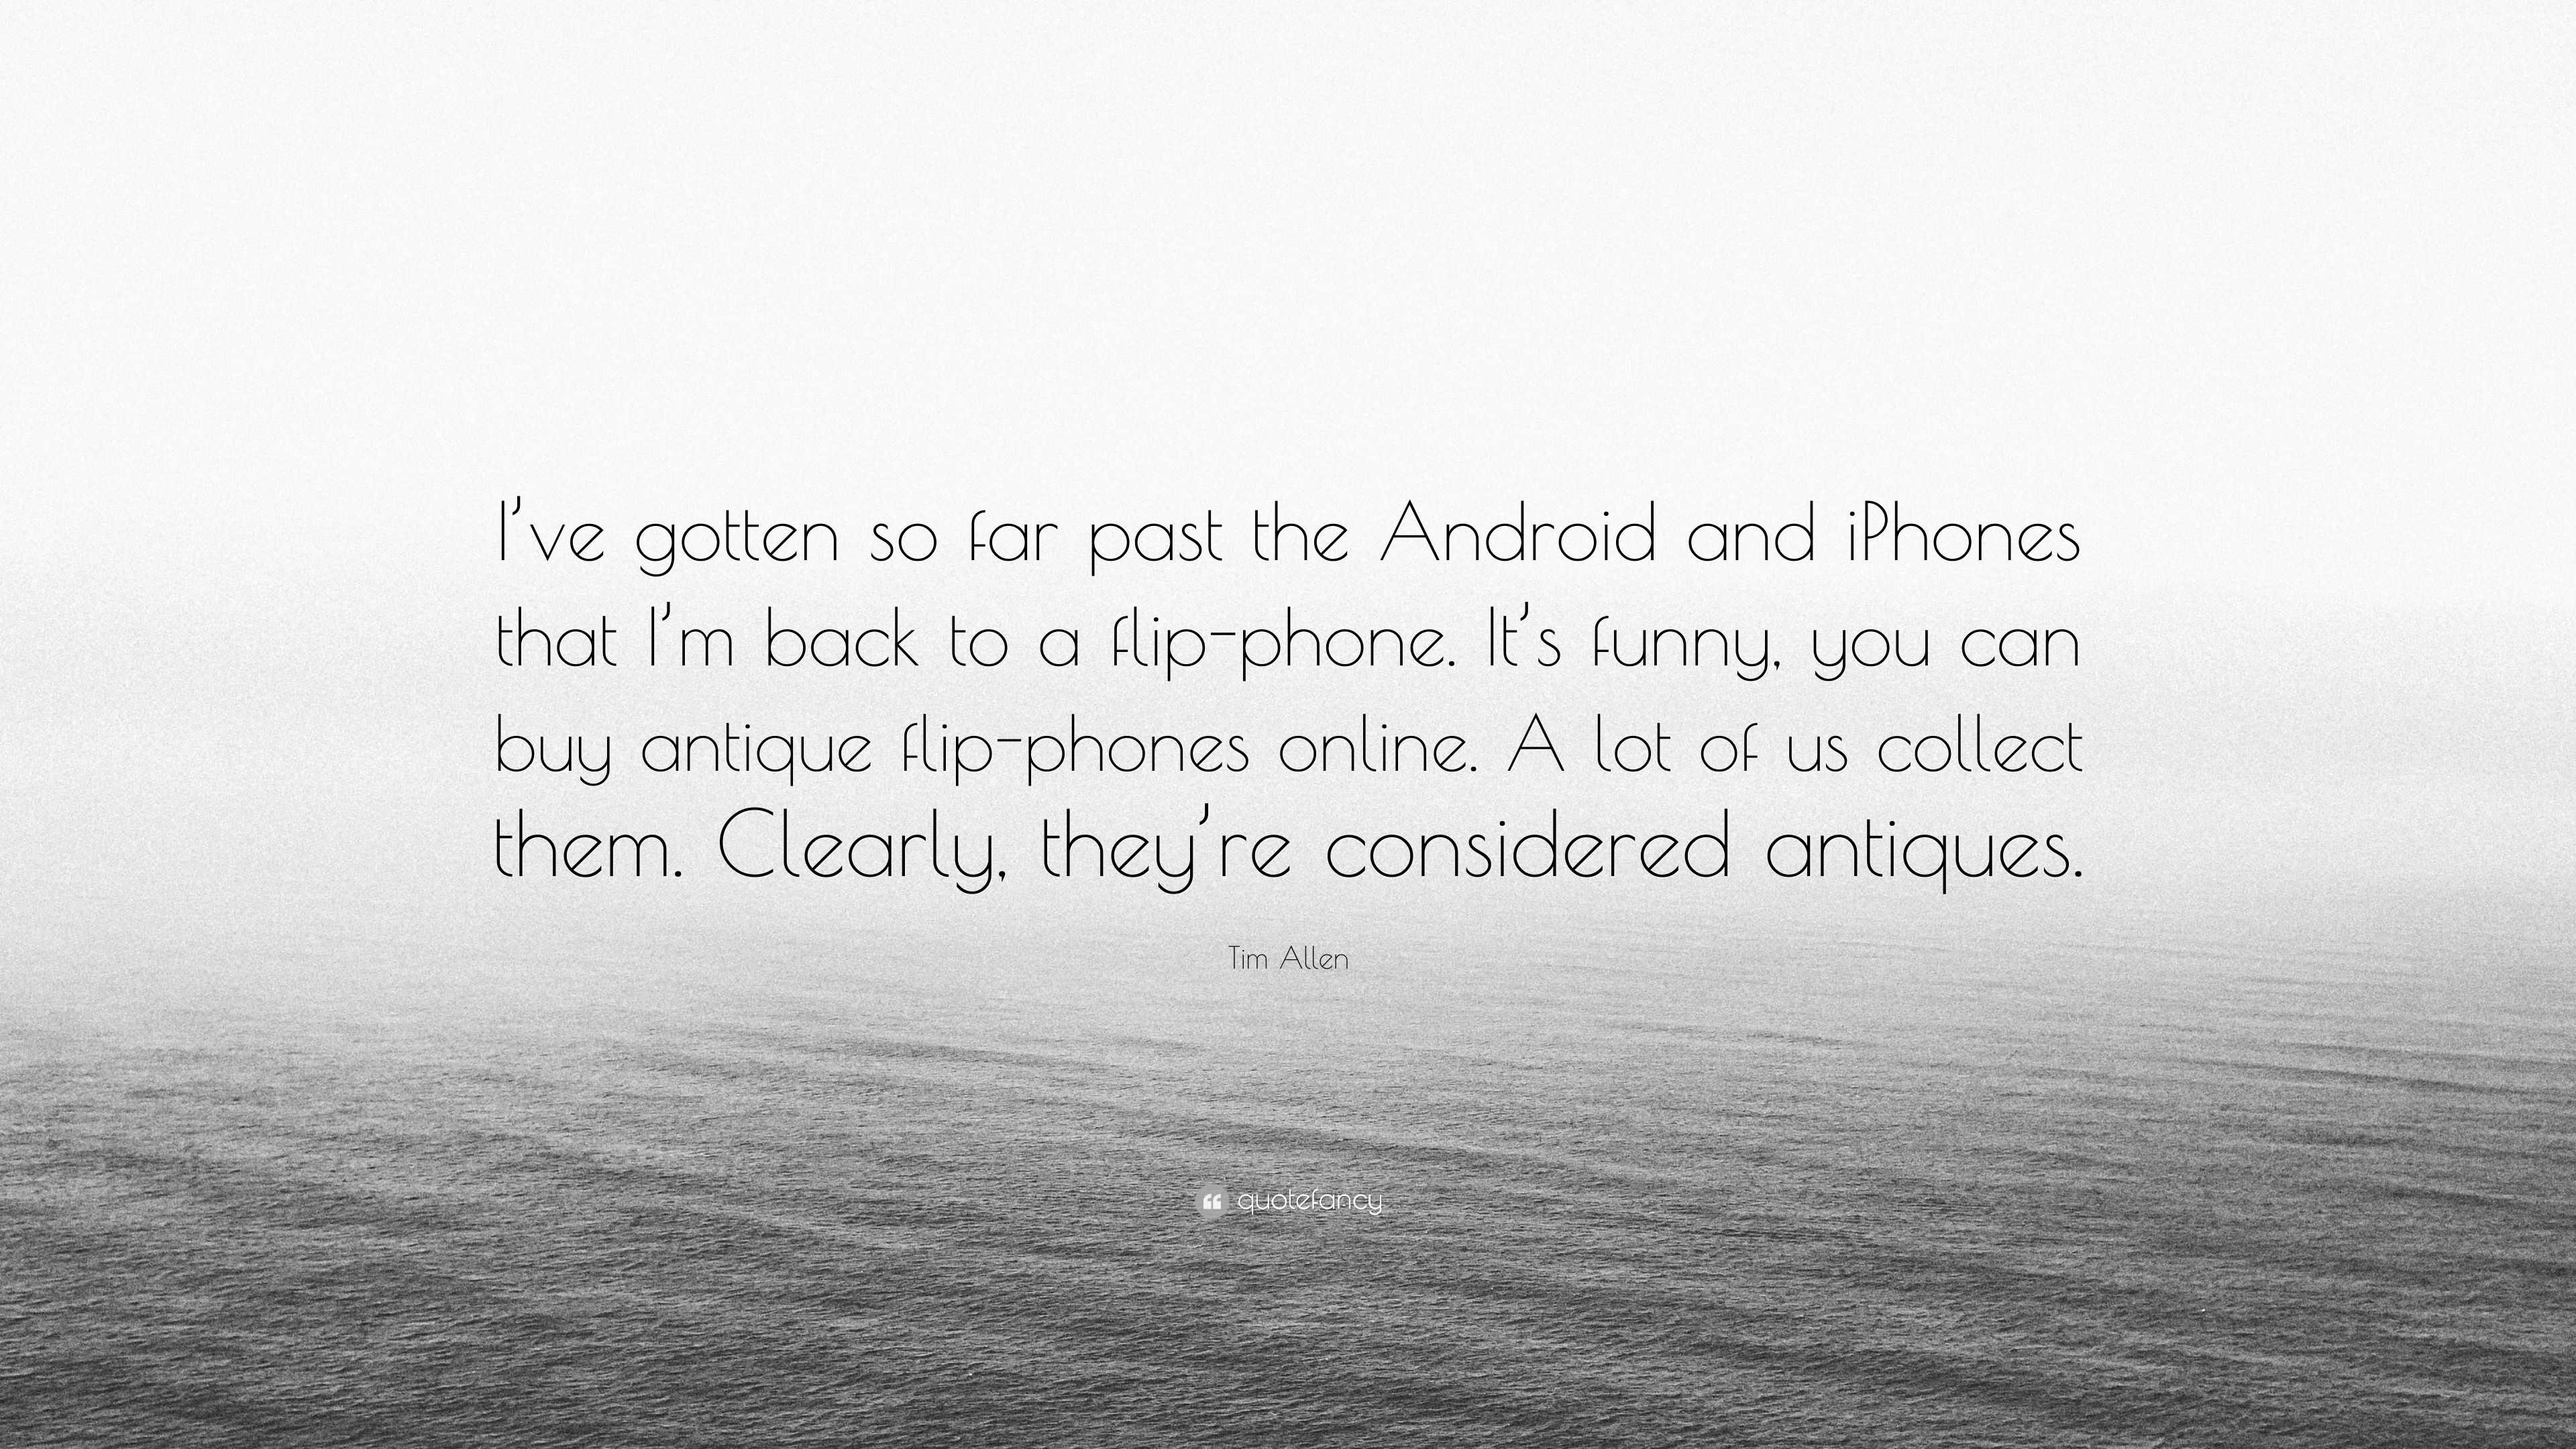 Tim Allen Quote: “I've gotten so far past the Android and iPhones that I'm  back to a flip-phone. It's funny, you can buy antique flip-phon...”